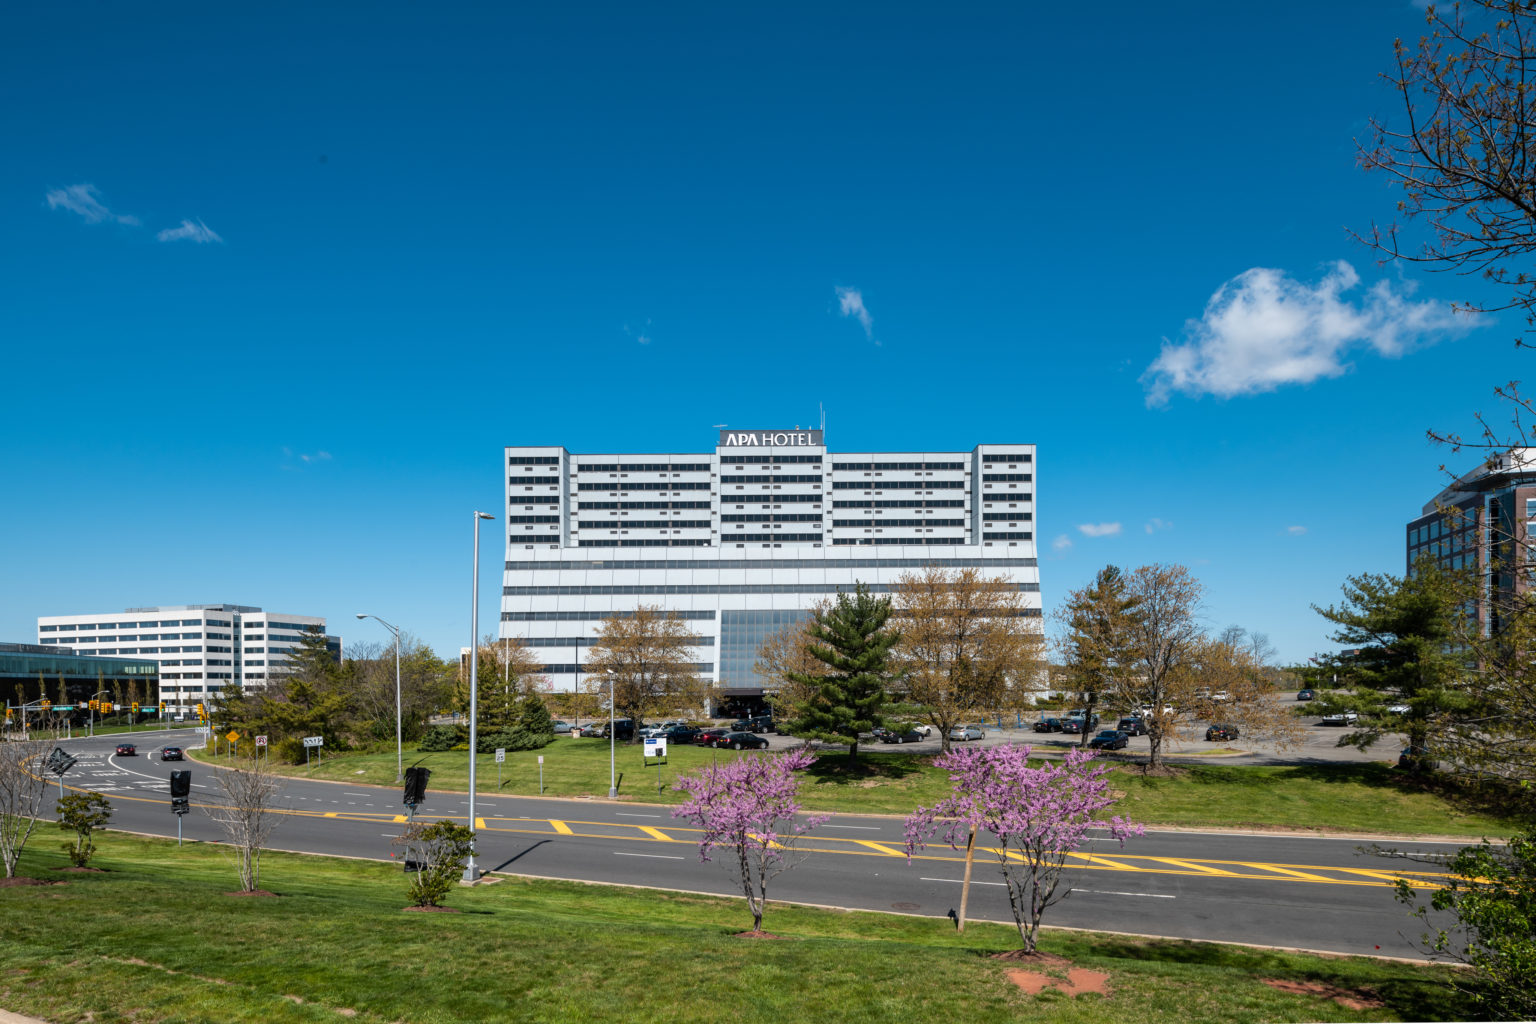 View of APA Hotel located in Iselin, NJ